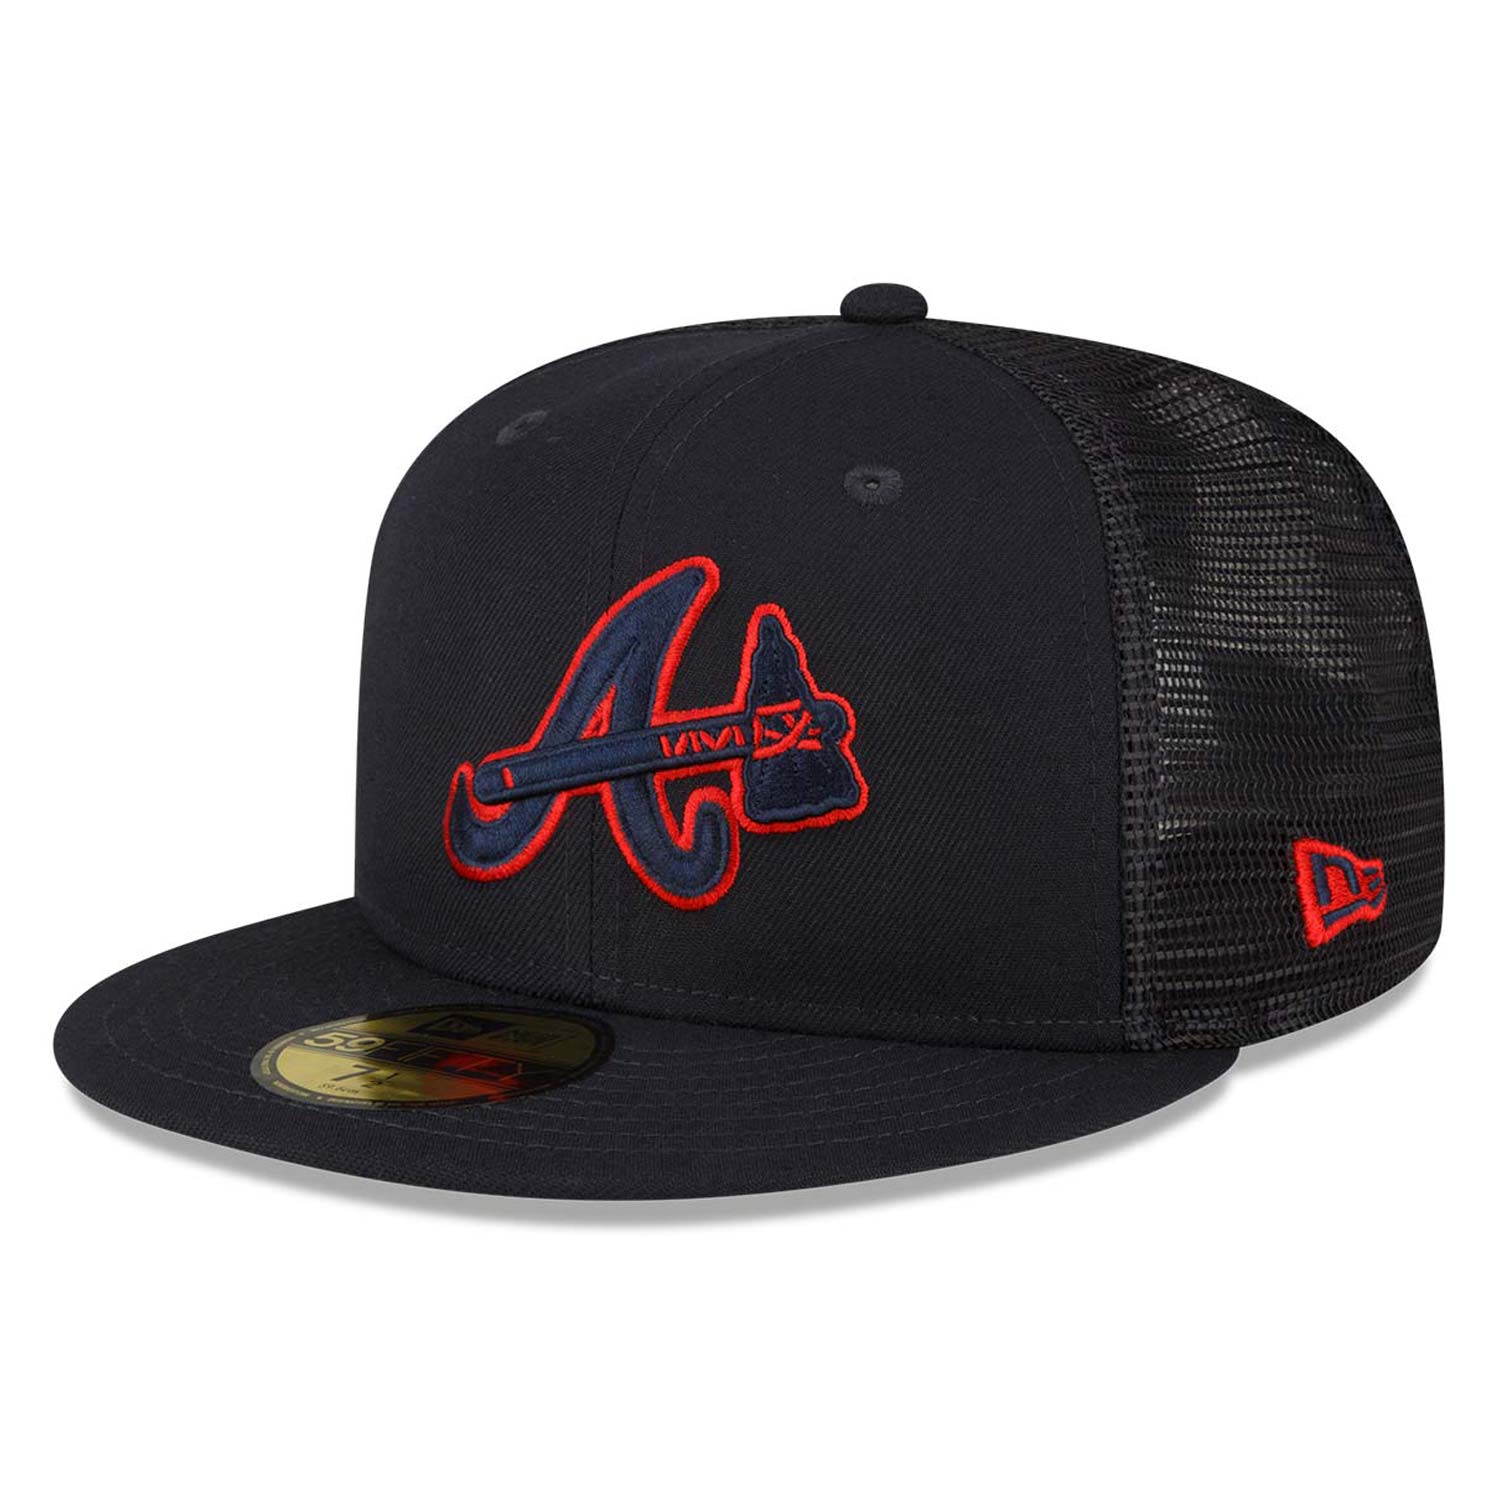 Official New Era MLB Spring Training Atlanta Braves 59FIFTY Fitted Cap